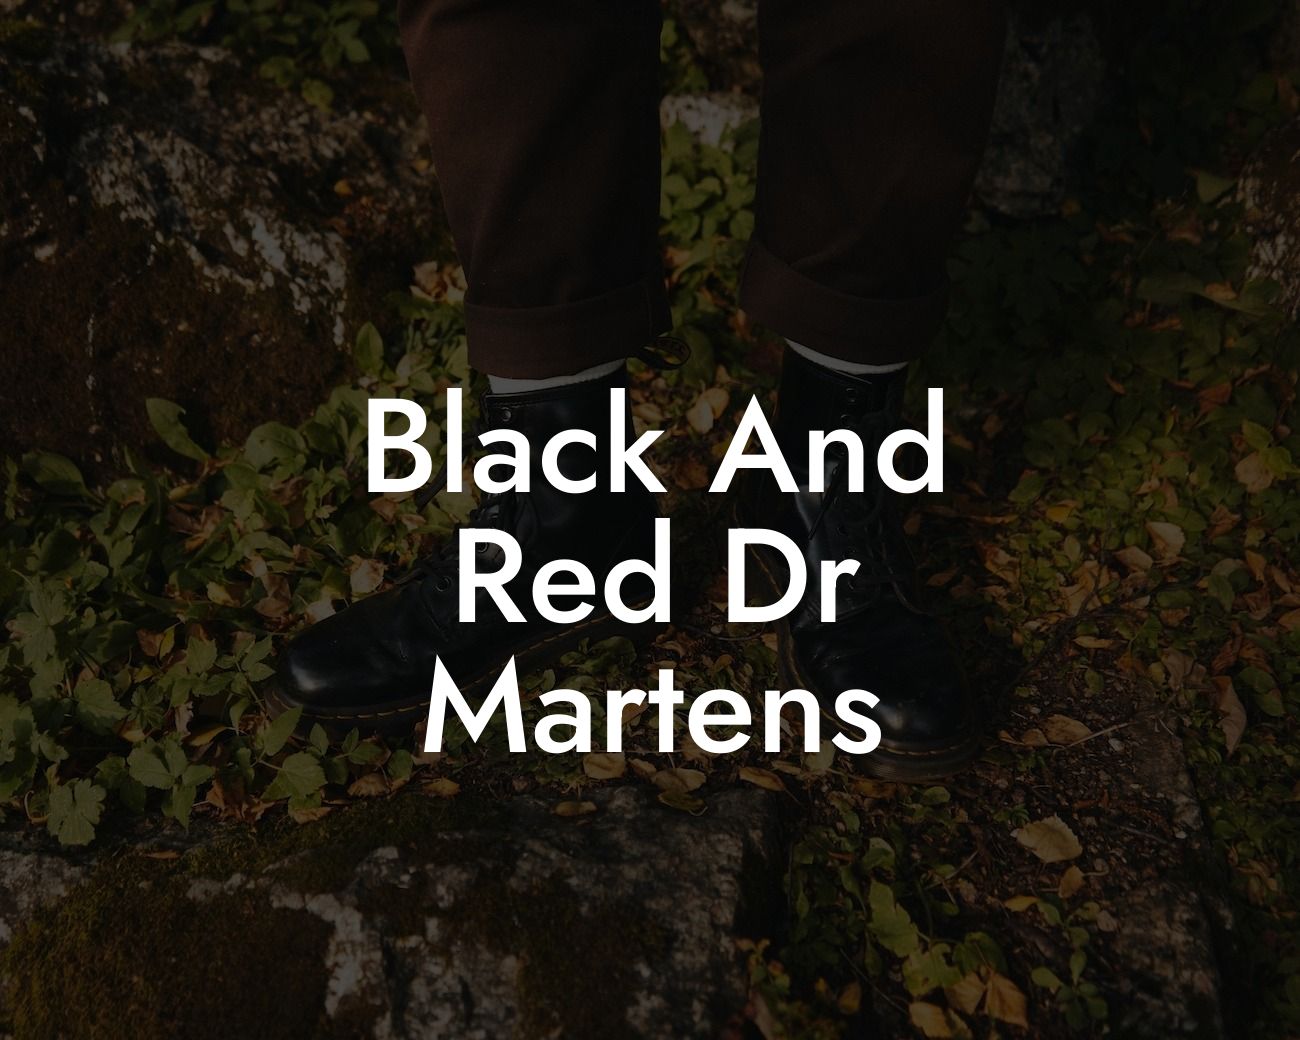 Black And Red Dr Martens